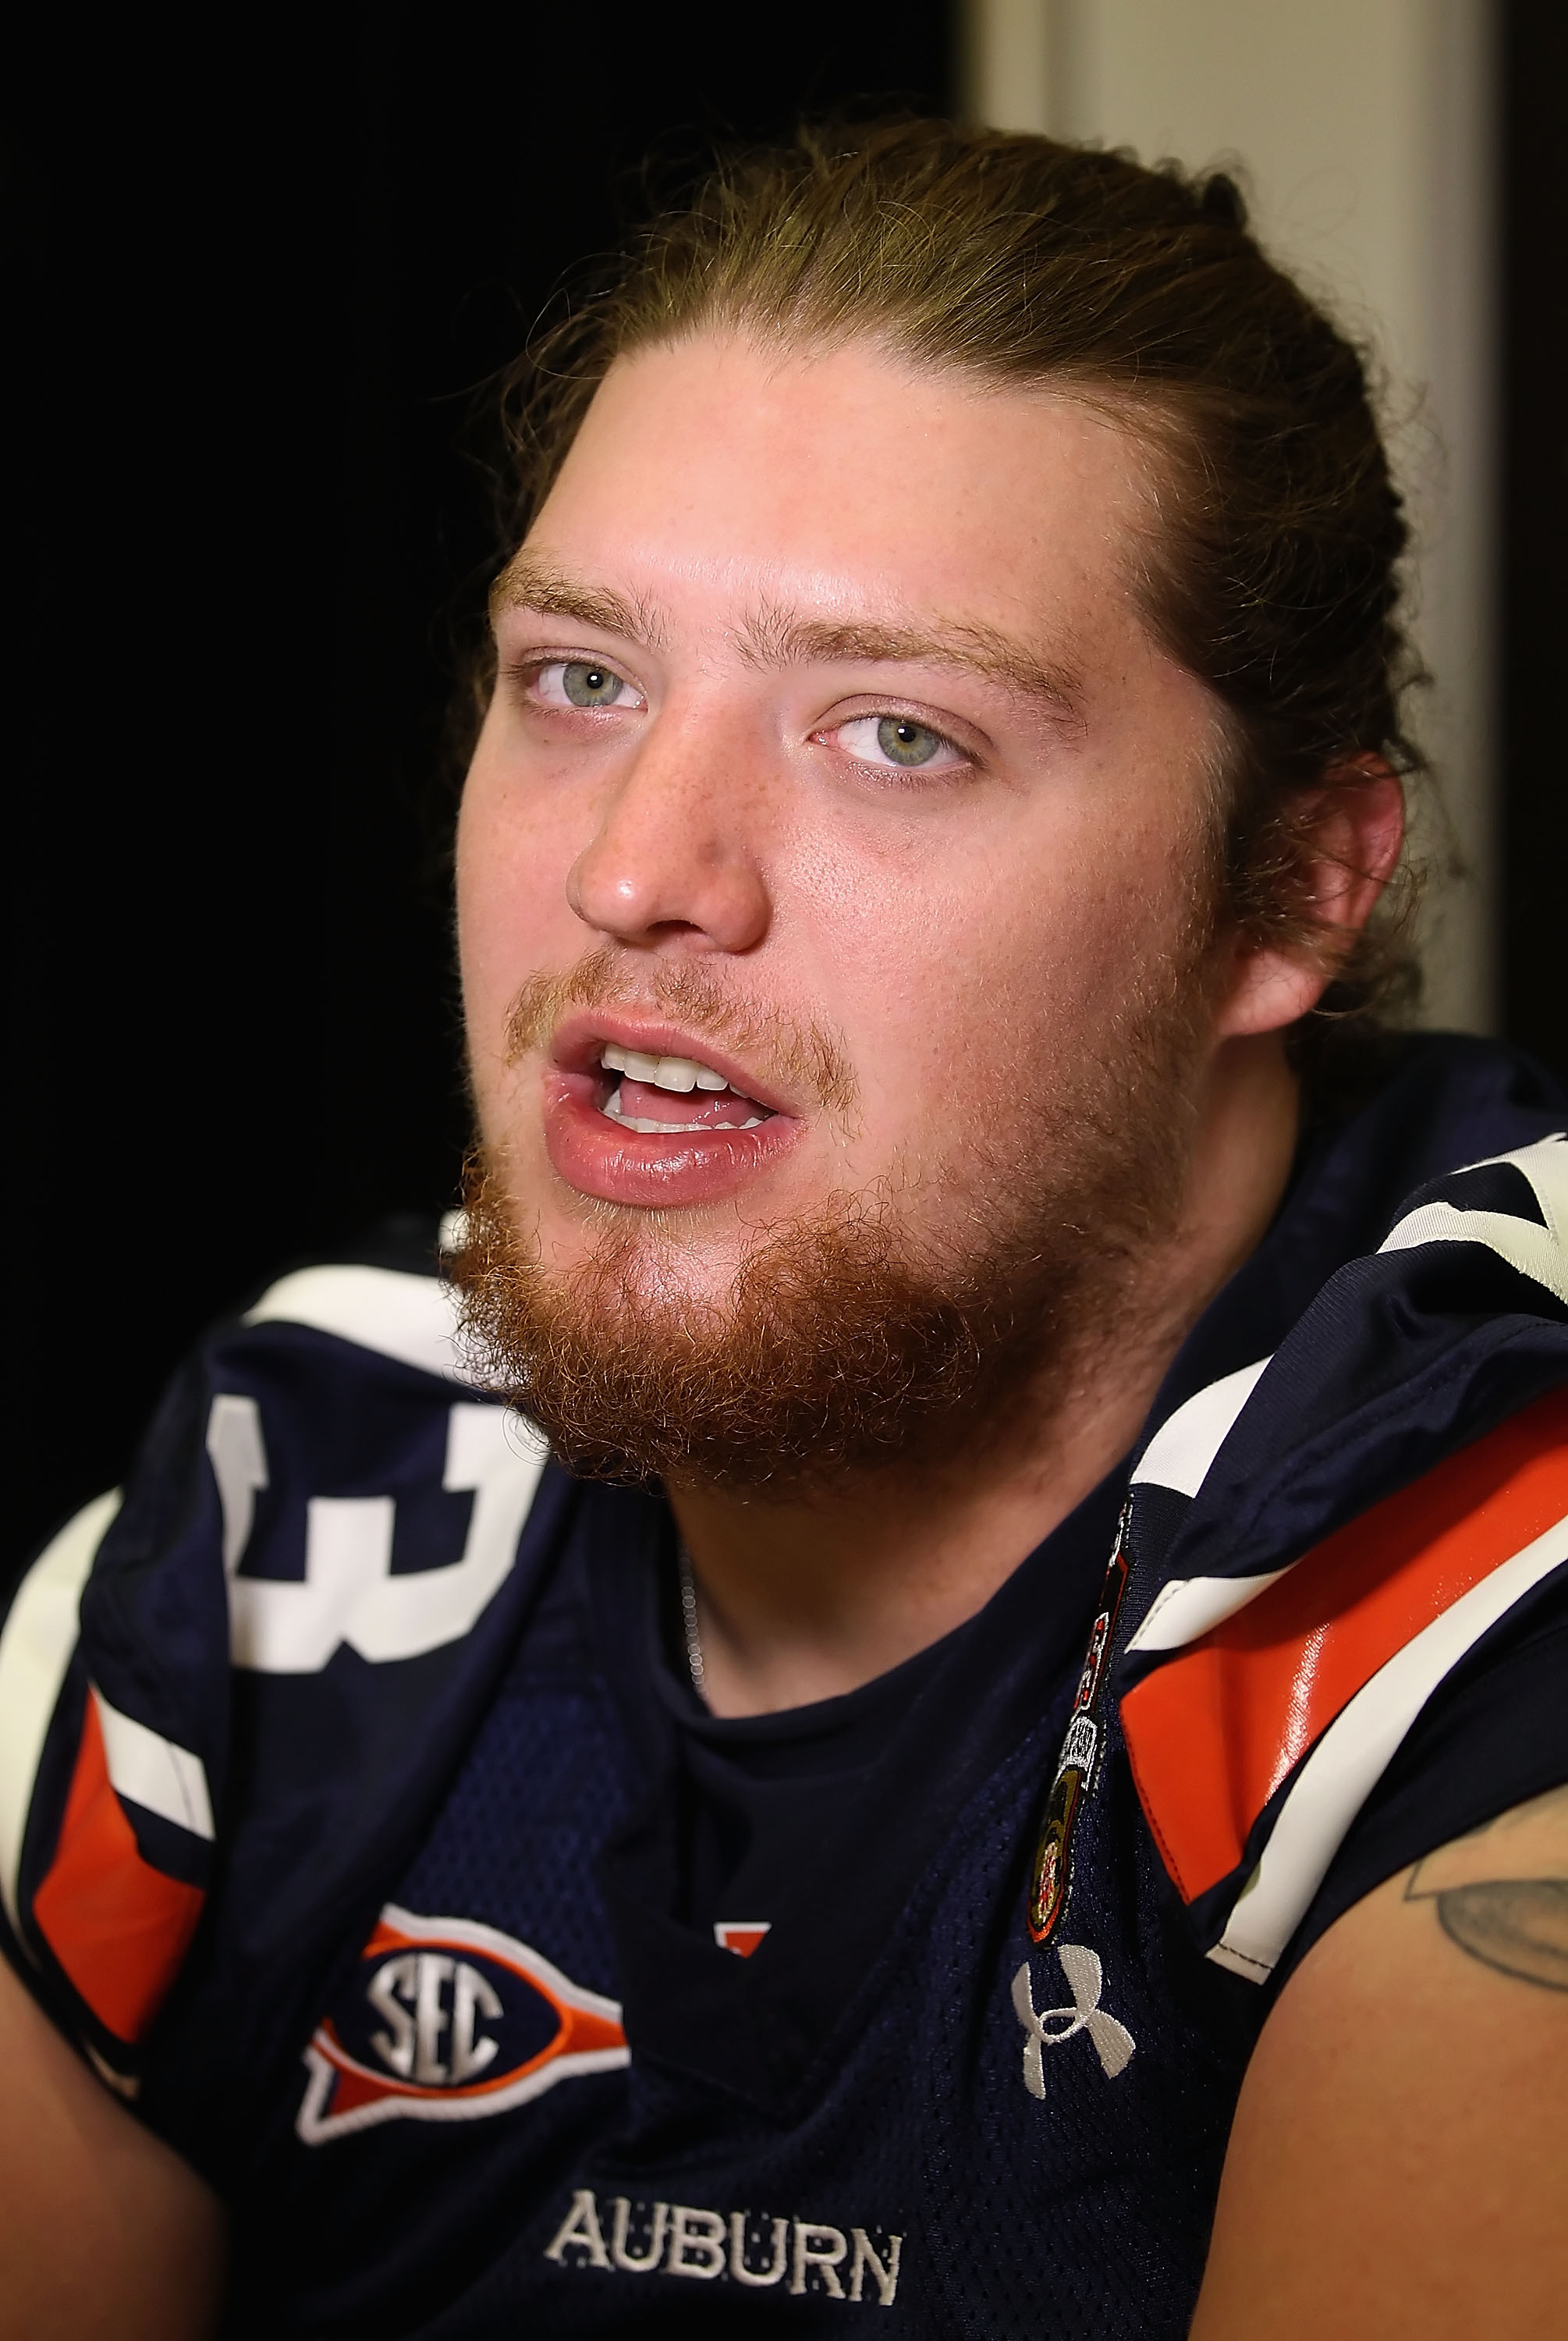 SCOTTSDALE, AZ - JANUARY 07:  Offensive tackle Lee Ziemba #73 of the Auburn Tigers speaks during Media Day for the Tostitos BCS National Championship Game at the JW Marriott Camelback Inn on January 7, 2011 in Scottsdale, Arizona.  (Photo by Christian Pet